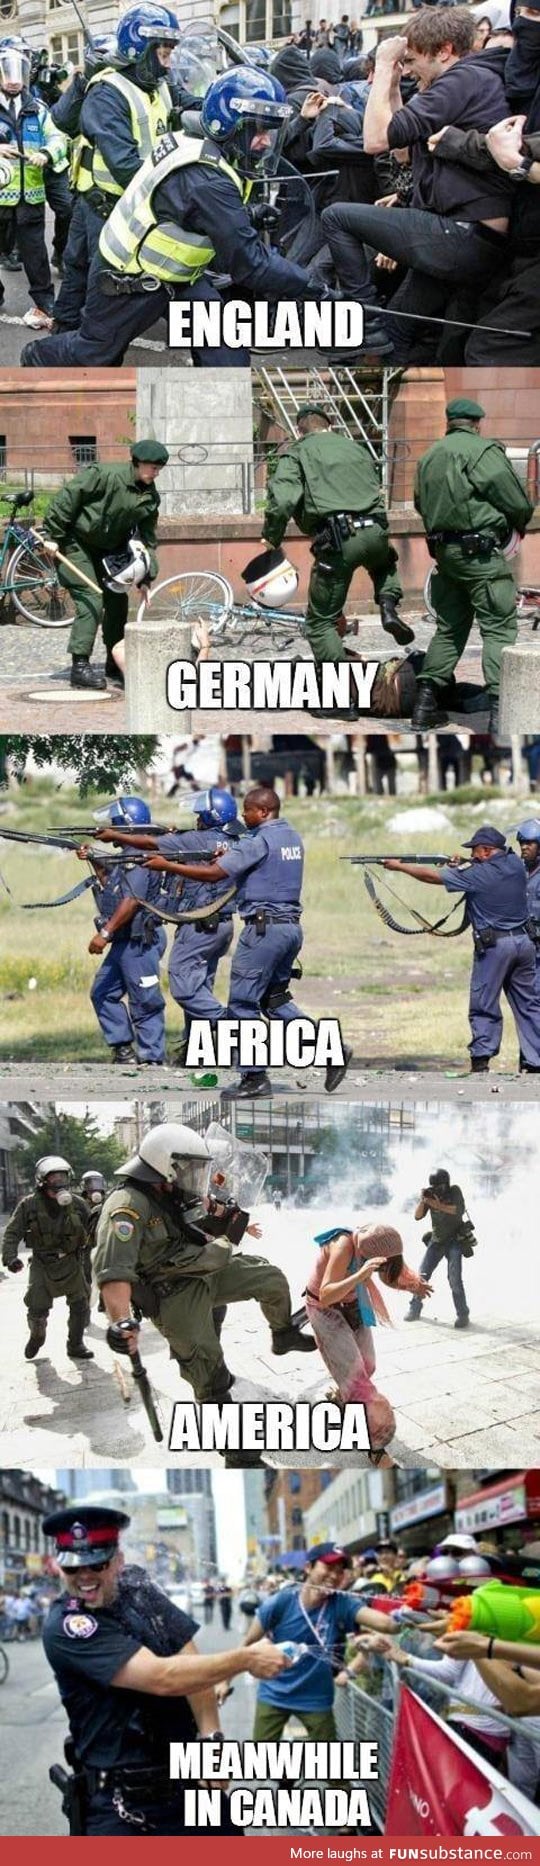 Police brutality across the world